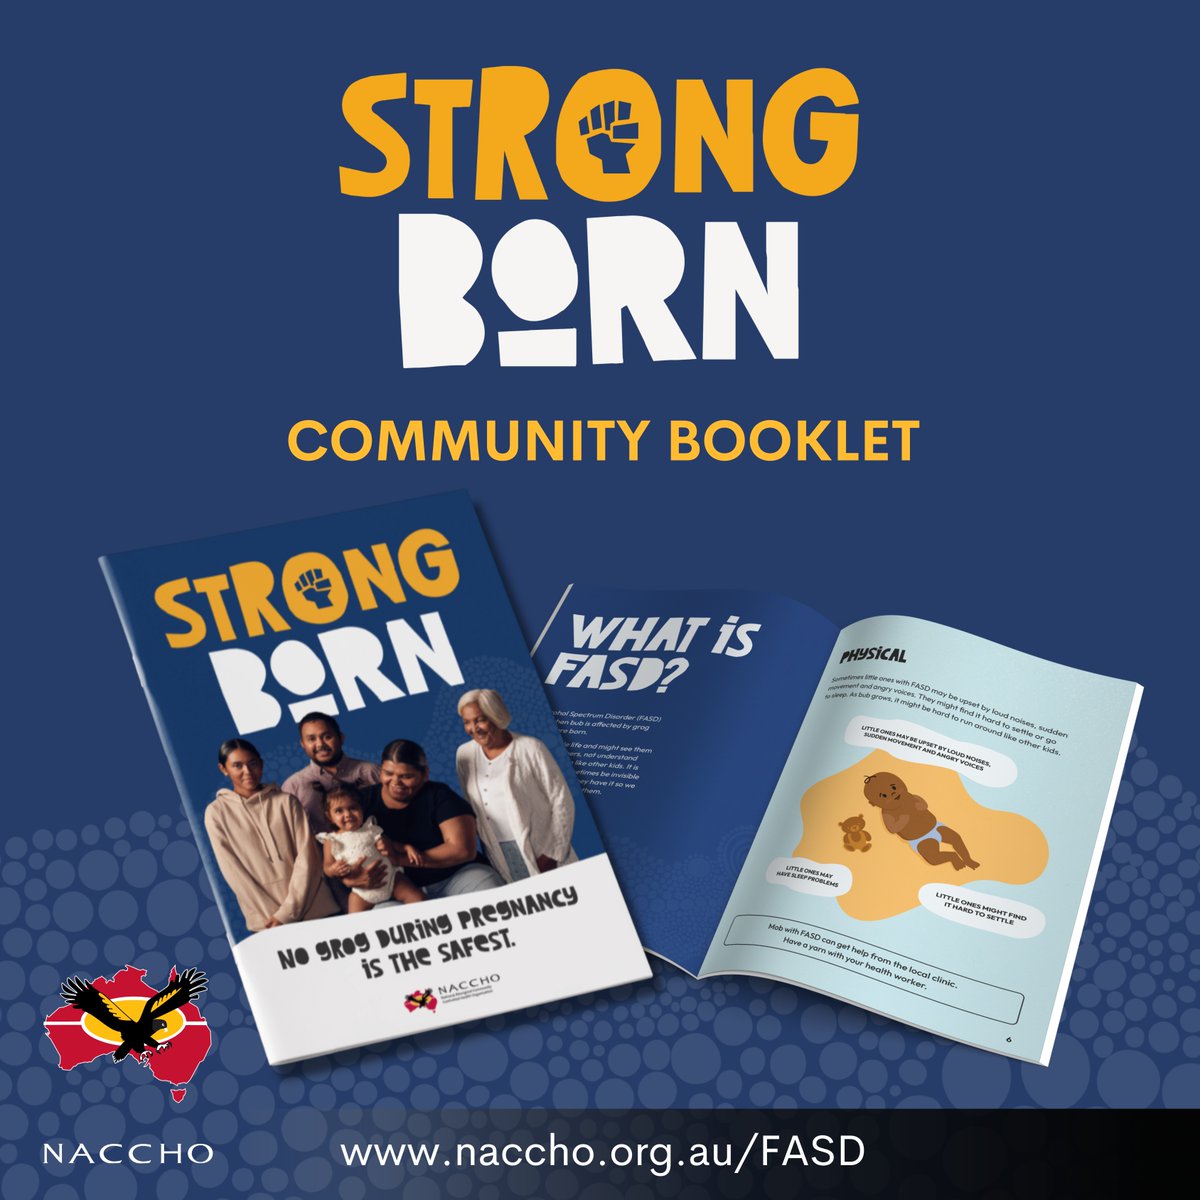 No grog during pregnancy is best.

The ‘Strong Born’ community booklet raises awareness of Fetal Alcohol Spectrum Disorder (FASD) among community members.

More info & resources: naccho.org.au/FASD

#StrongBorn #FASDawareness #AlcoholHarms #Pregnancy